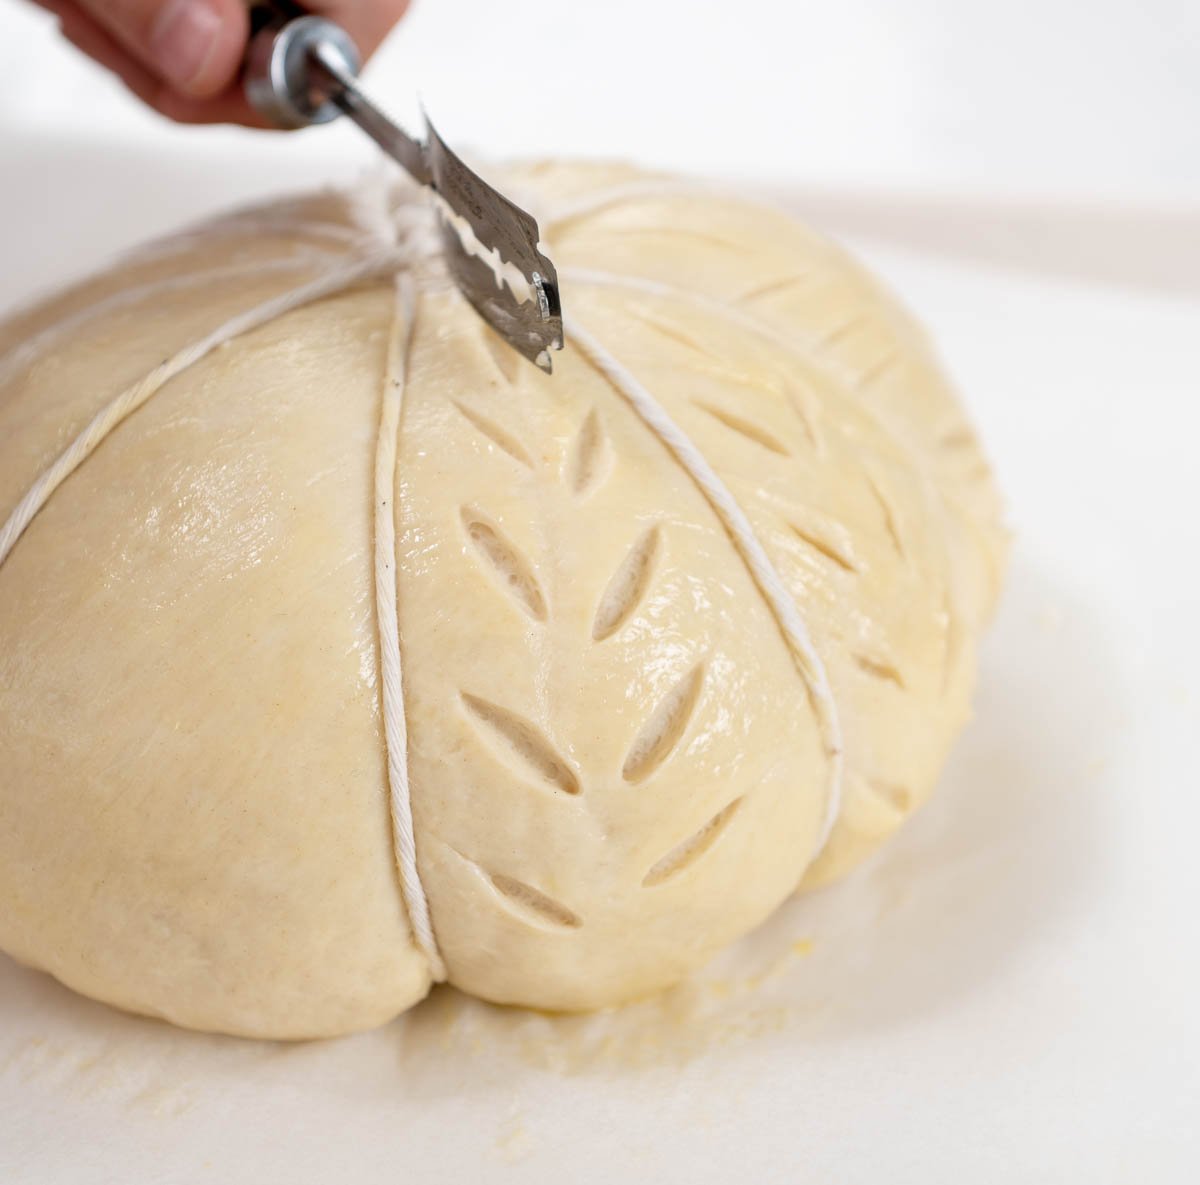 Cutting slits into the bread dough with a razorblade